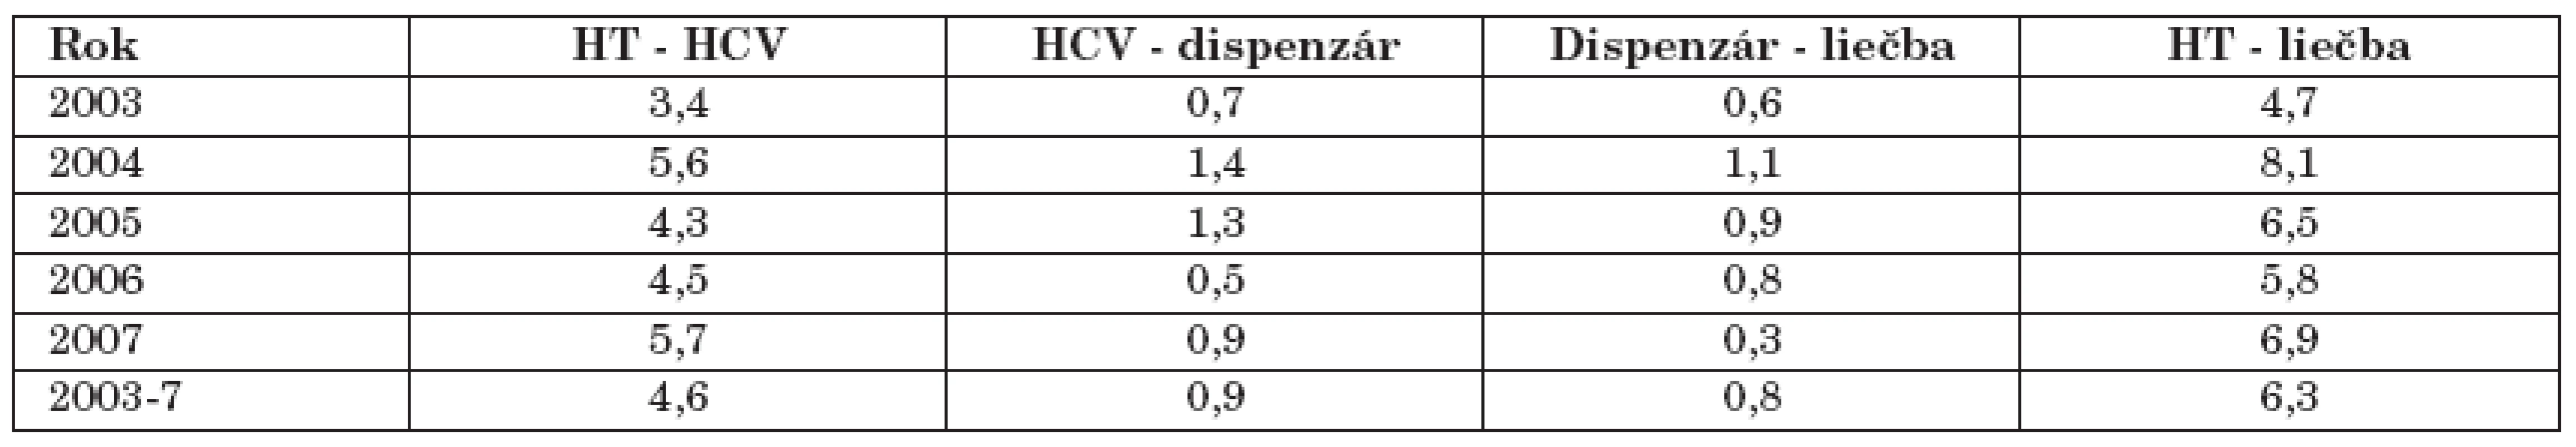 Časový sled diagnostického postupu (v rokoch)
Table 2. Time intervals from the first signs to diagnosis and treatment (in years)